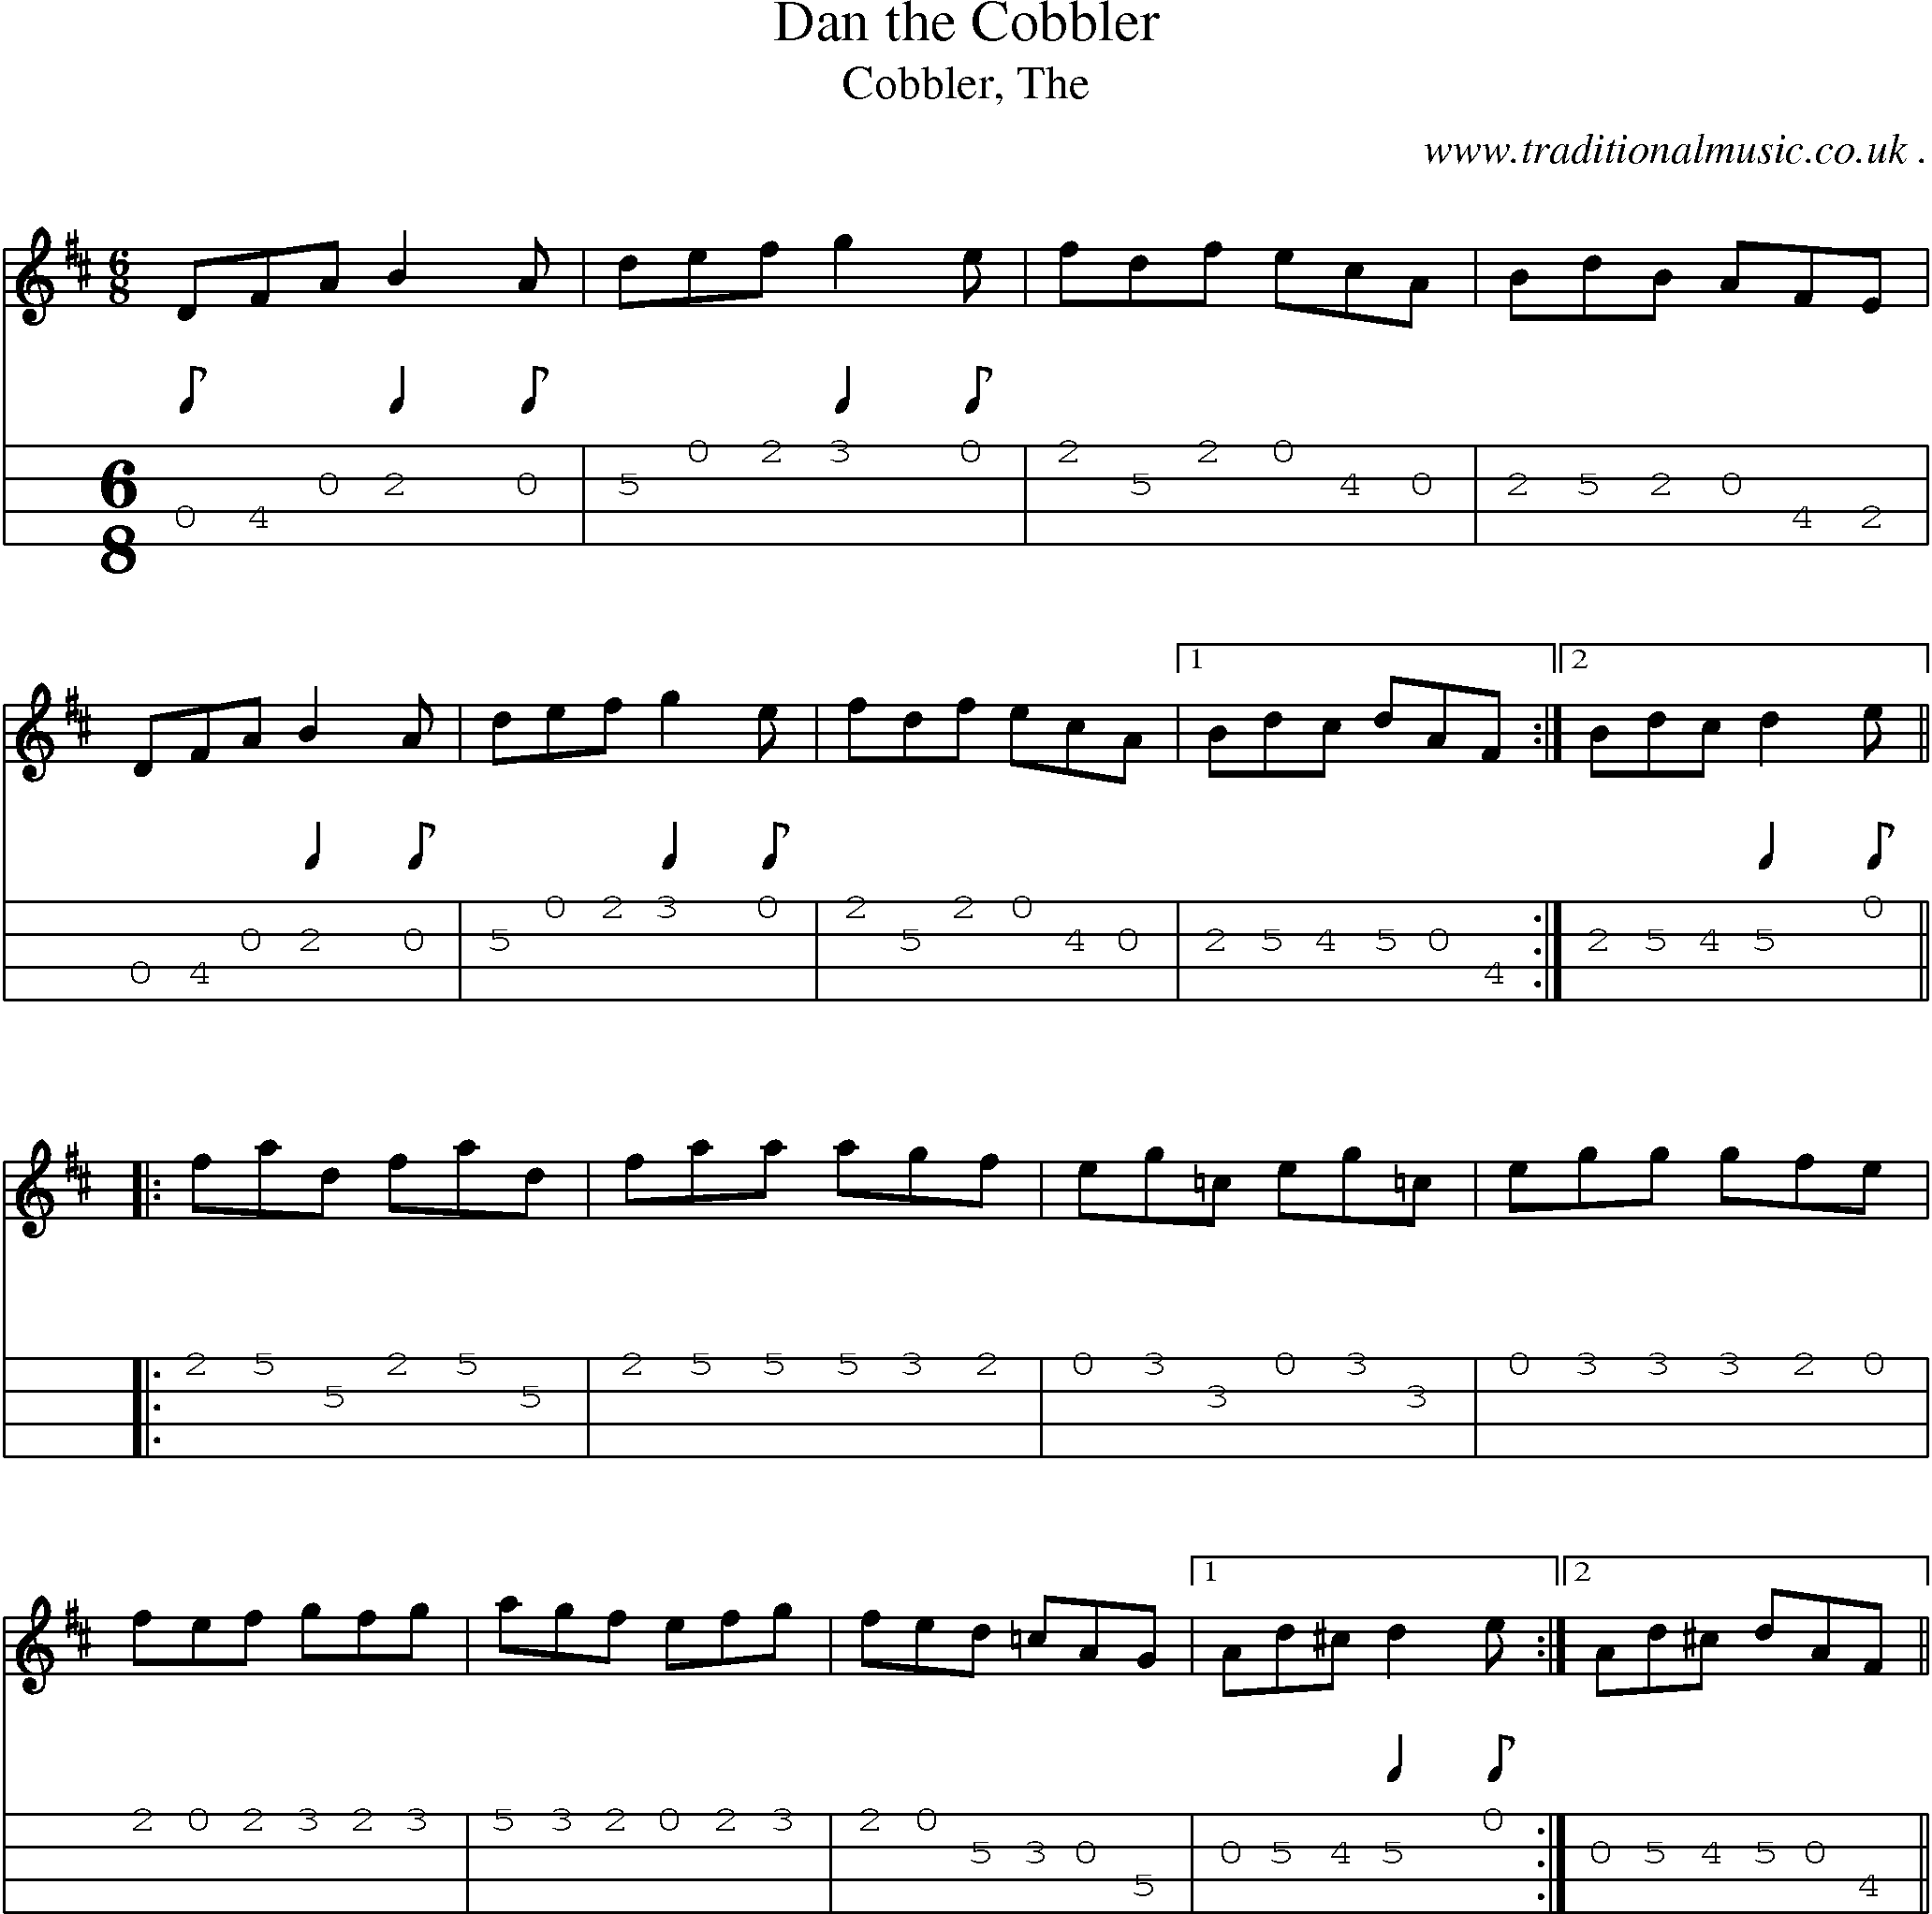 Sheet-music  score, Chords and Mandolin Tabs for Dan The Cobbler